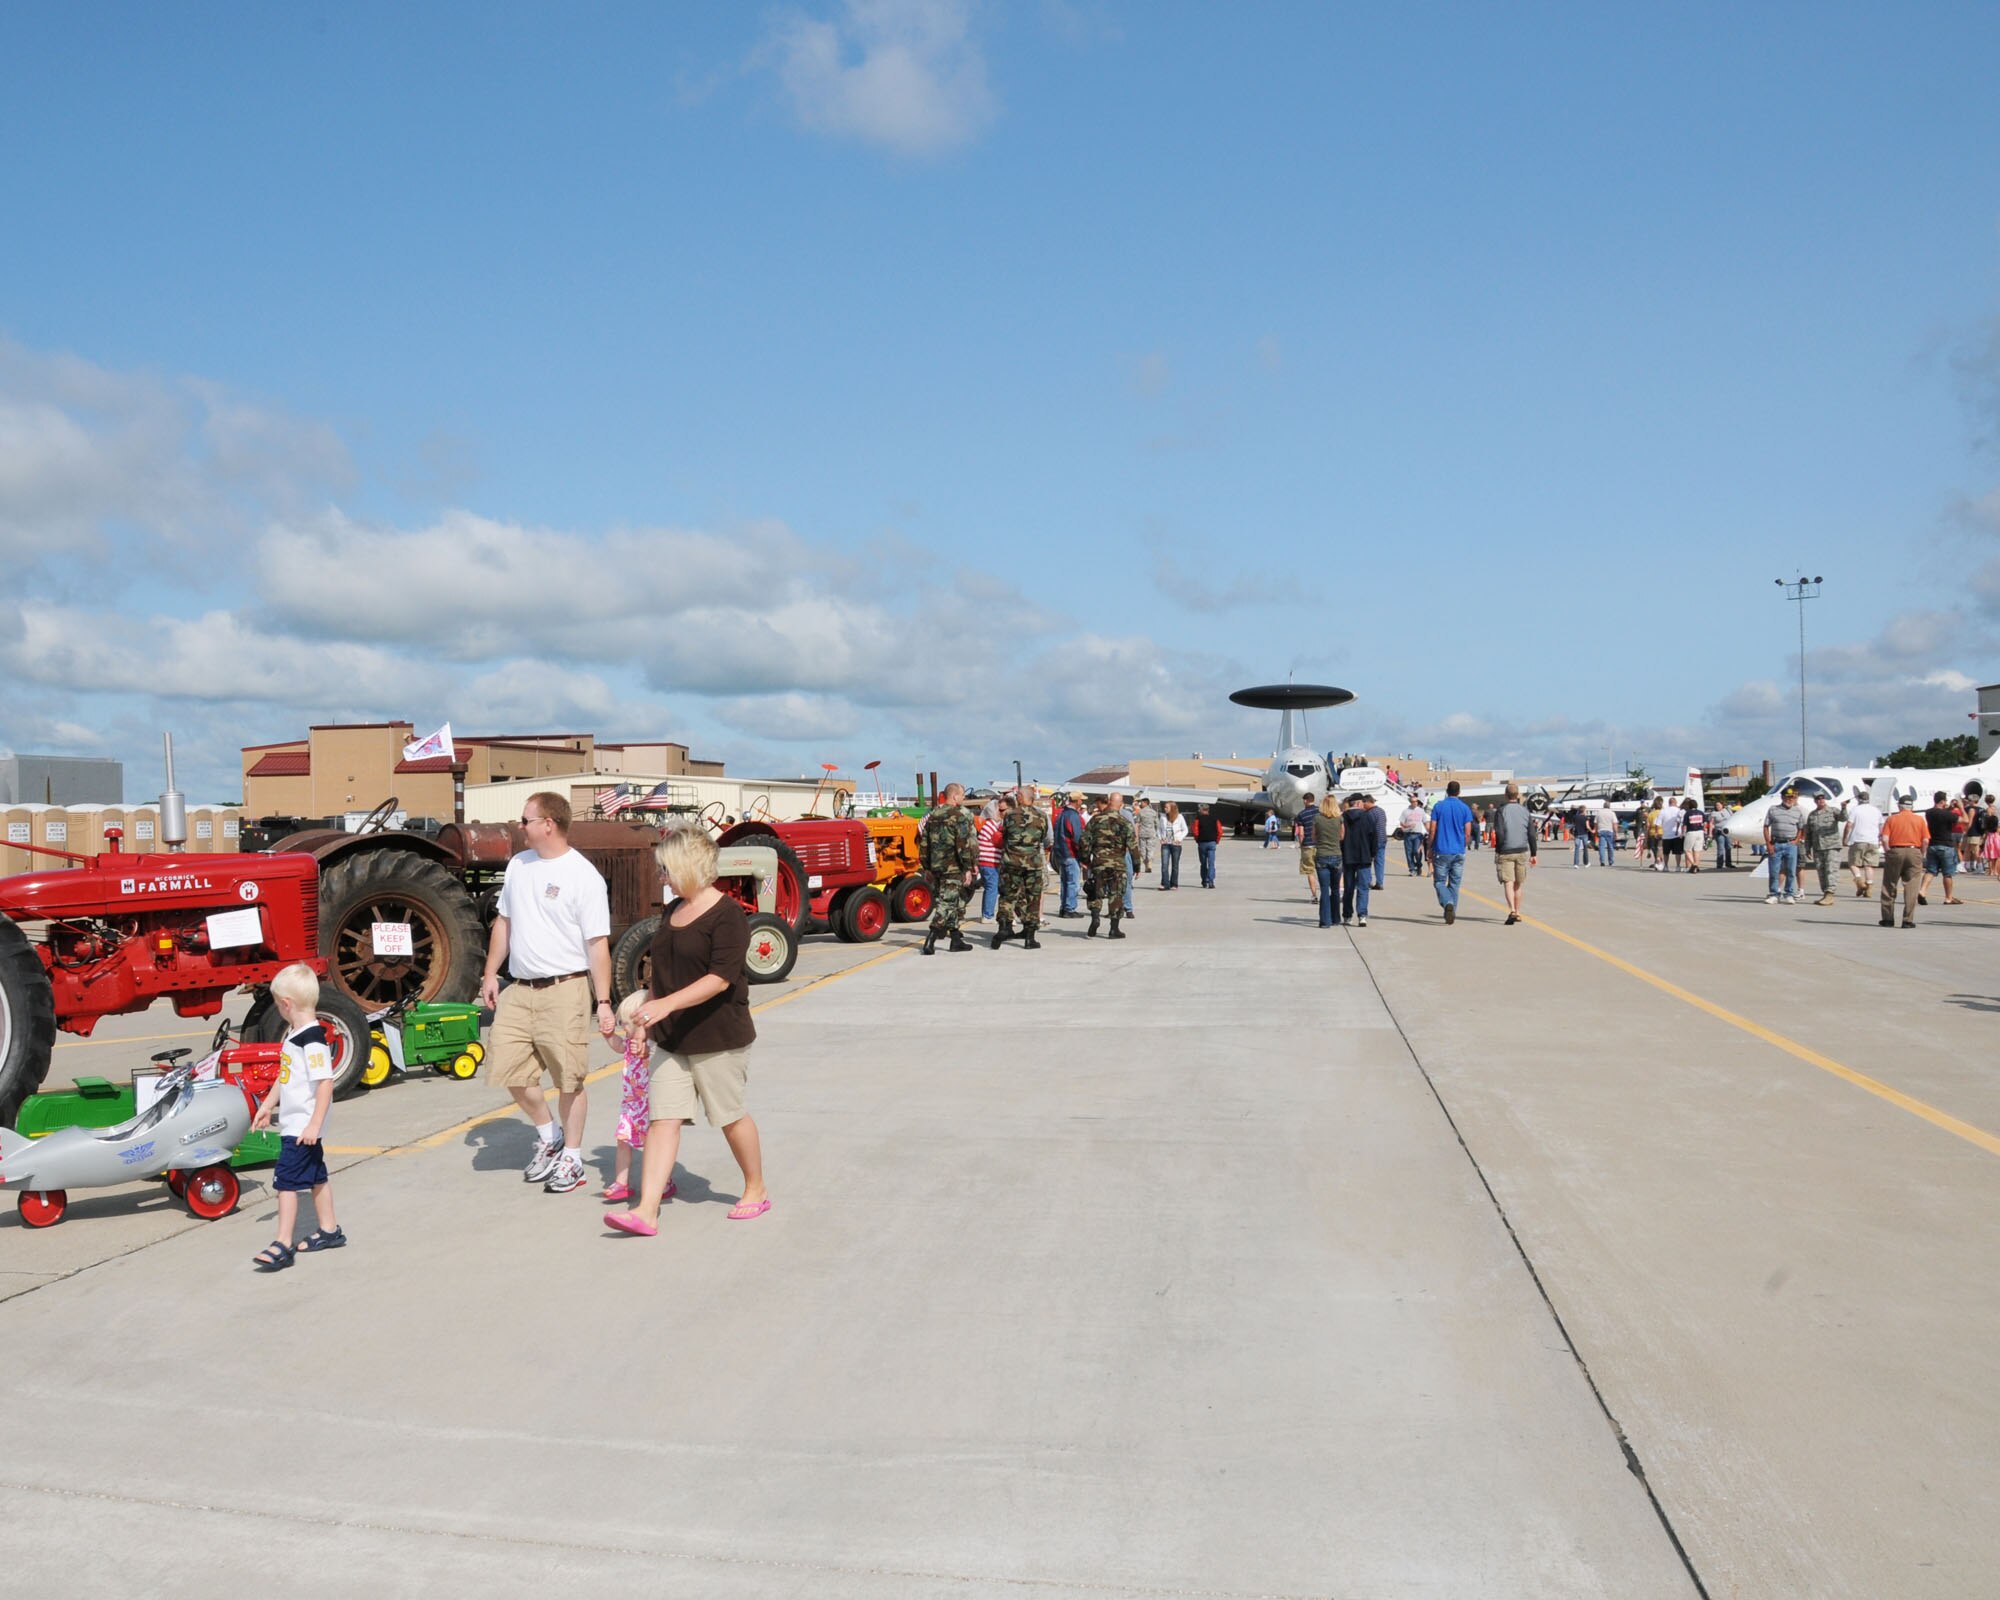 Tractors were on display beside various aircraft filling the ramp at the Sioux Gateway Airport / Col. Bud Day Field, in Sioux City, Iowa, as a B25 flies overhead.  This was all a part of the unique Air & Ag Expo hosted by the 185th Air Refueling Wing.
Official Air Force Photo by: MSgt. Bill Wiseman (released)